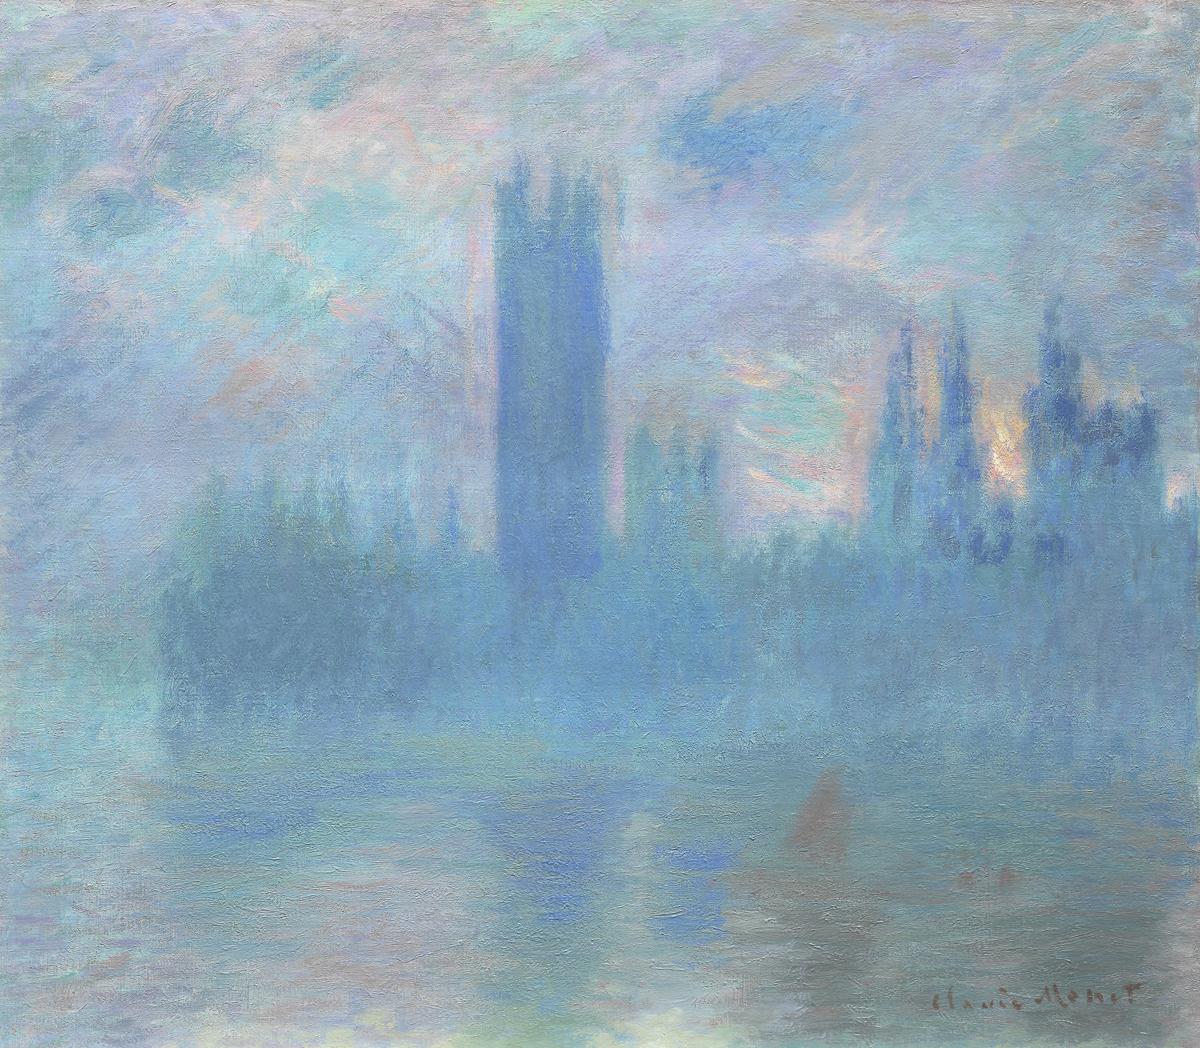 The original master work this is based on. Houses of Parliament, London by Claude Monet - 1900/01 - CC0 Public Domain Designation